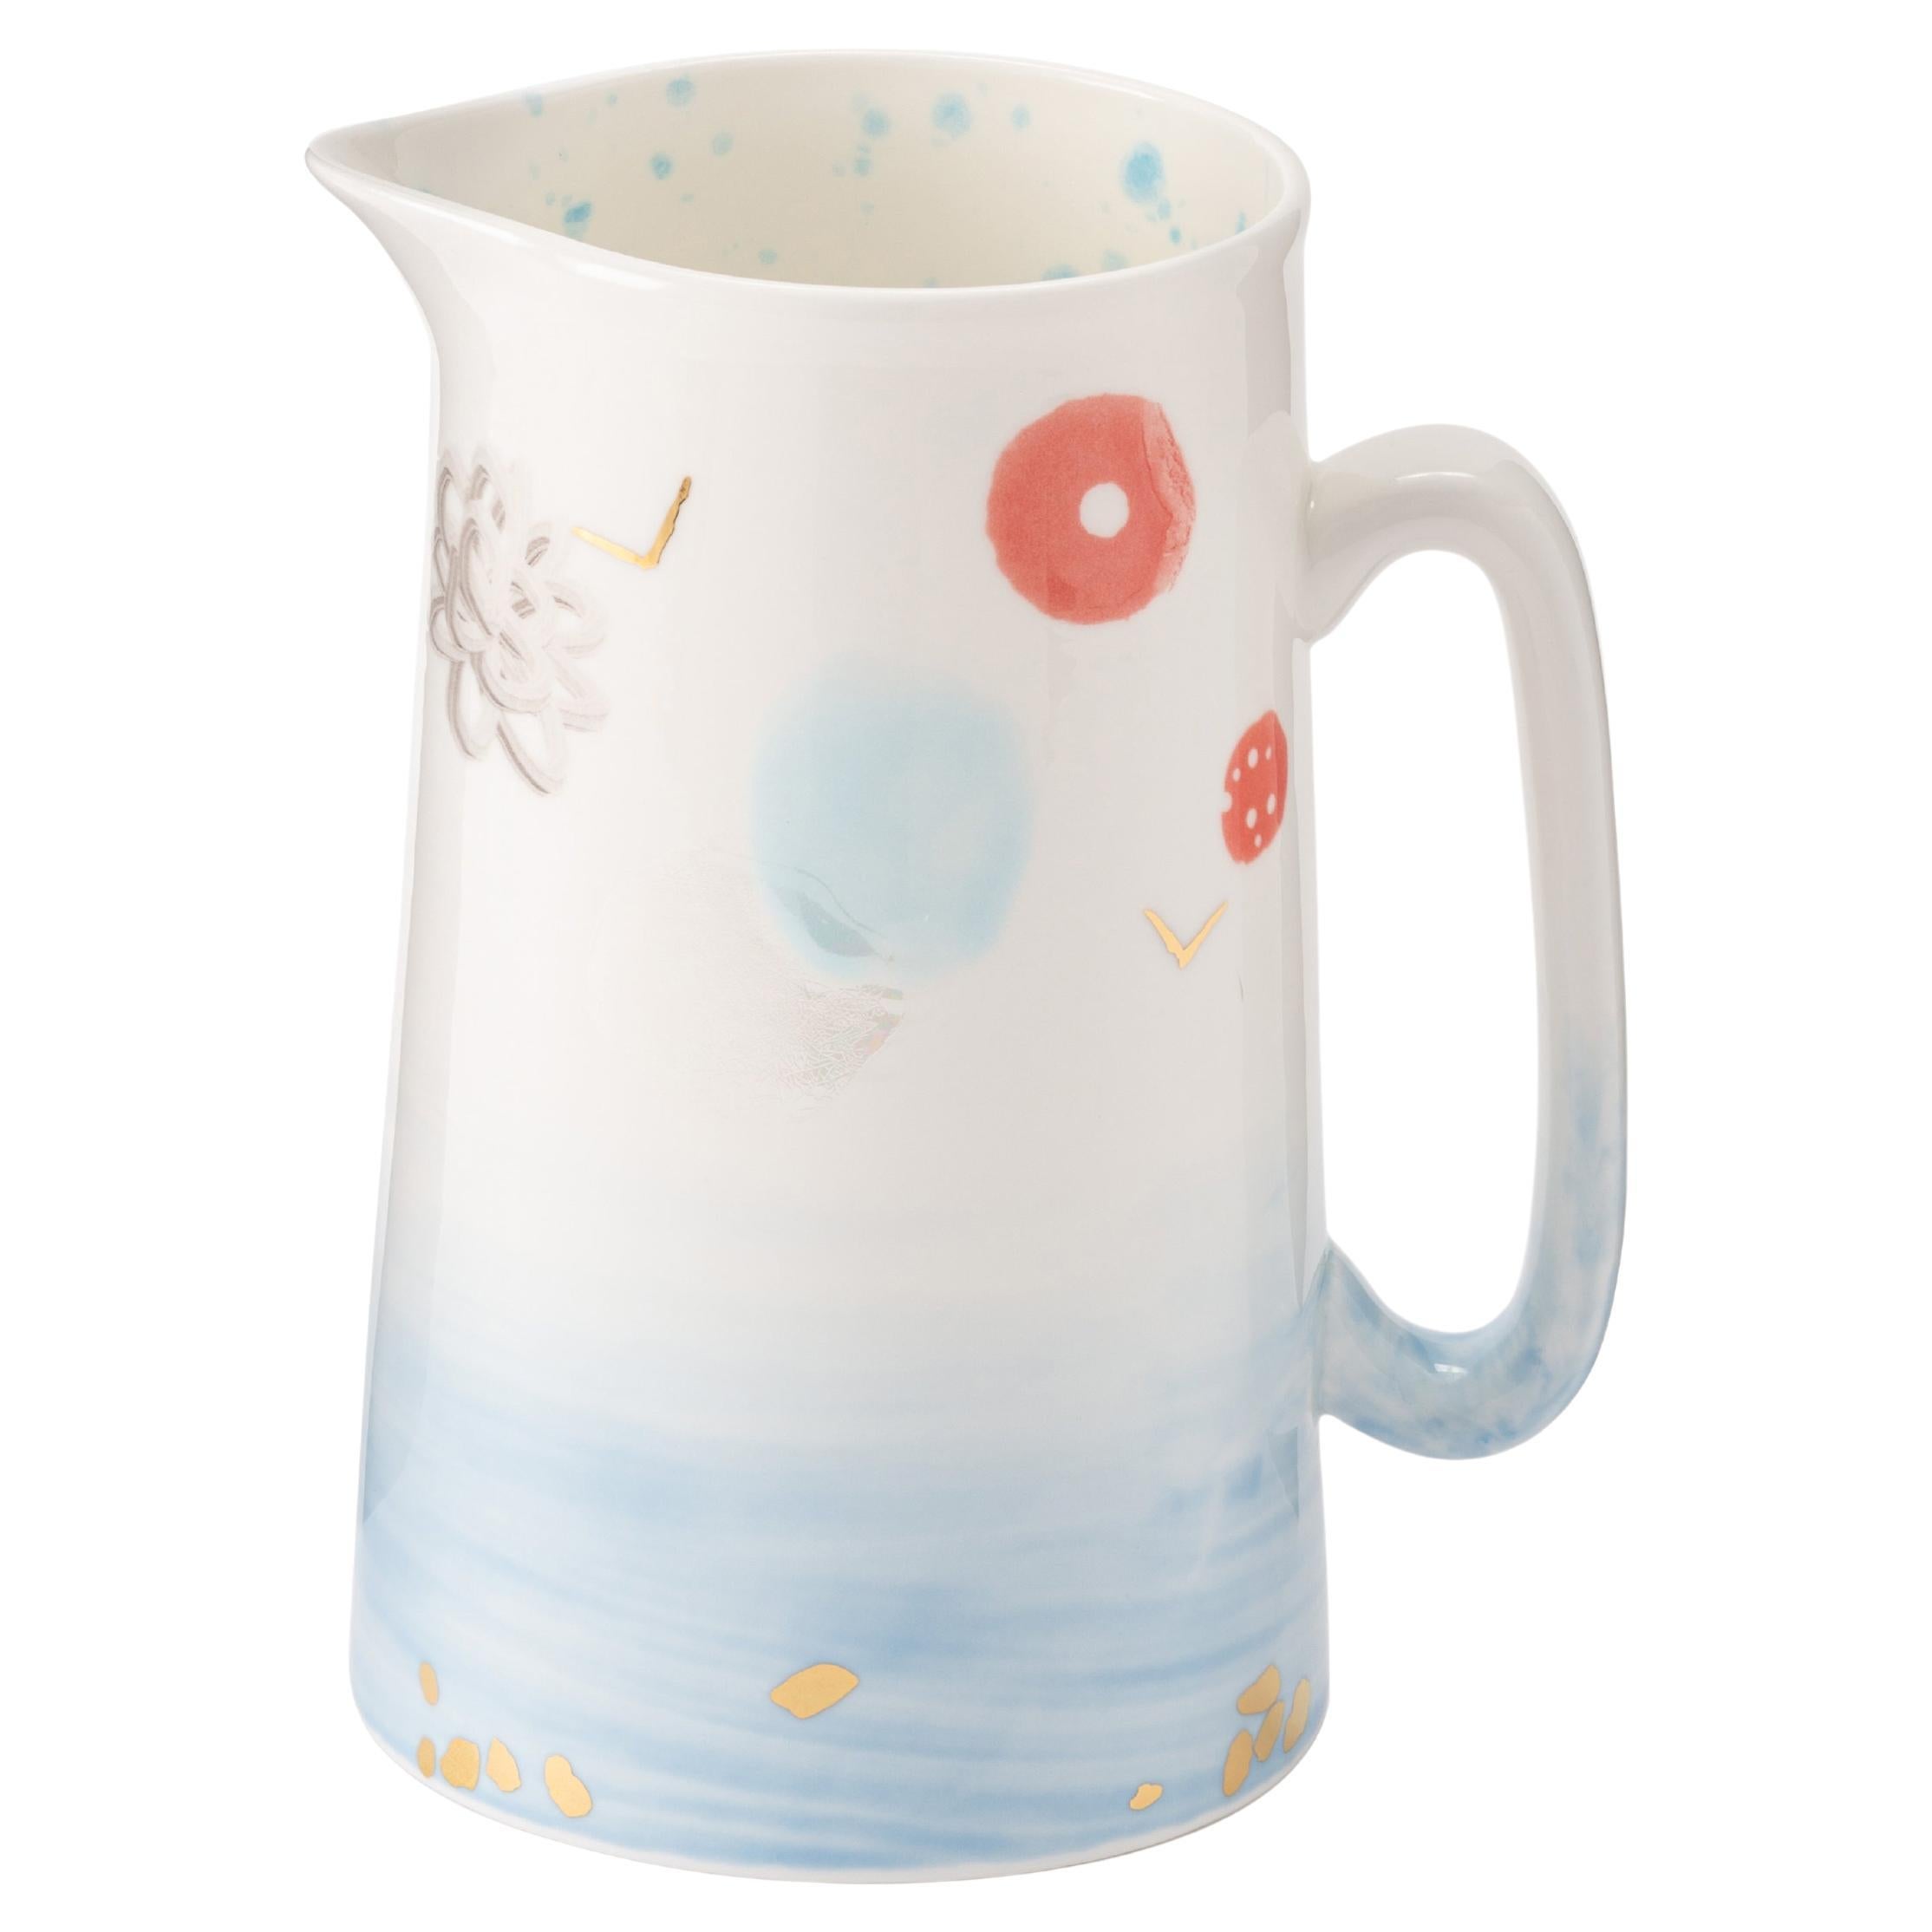 Contemporary Hand-Painted Porcelain 2 Pint Jug Pitcher, Made in Italy